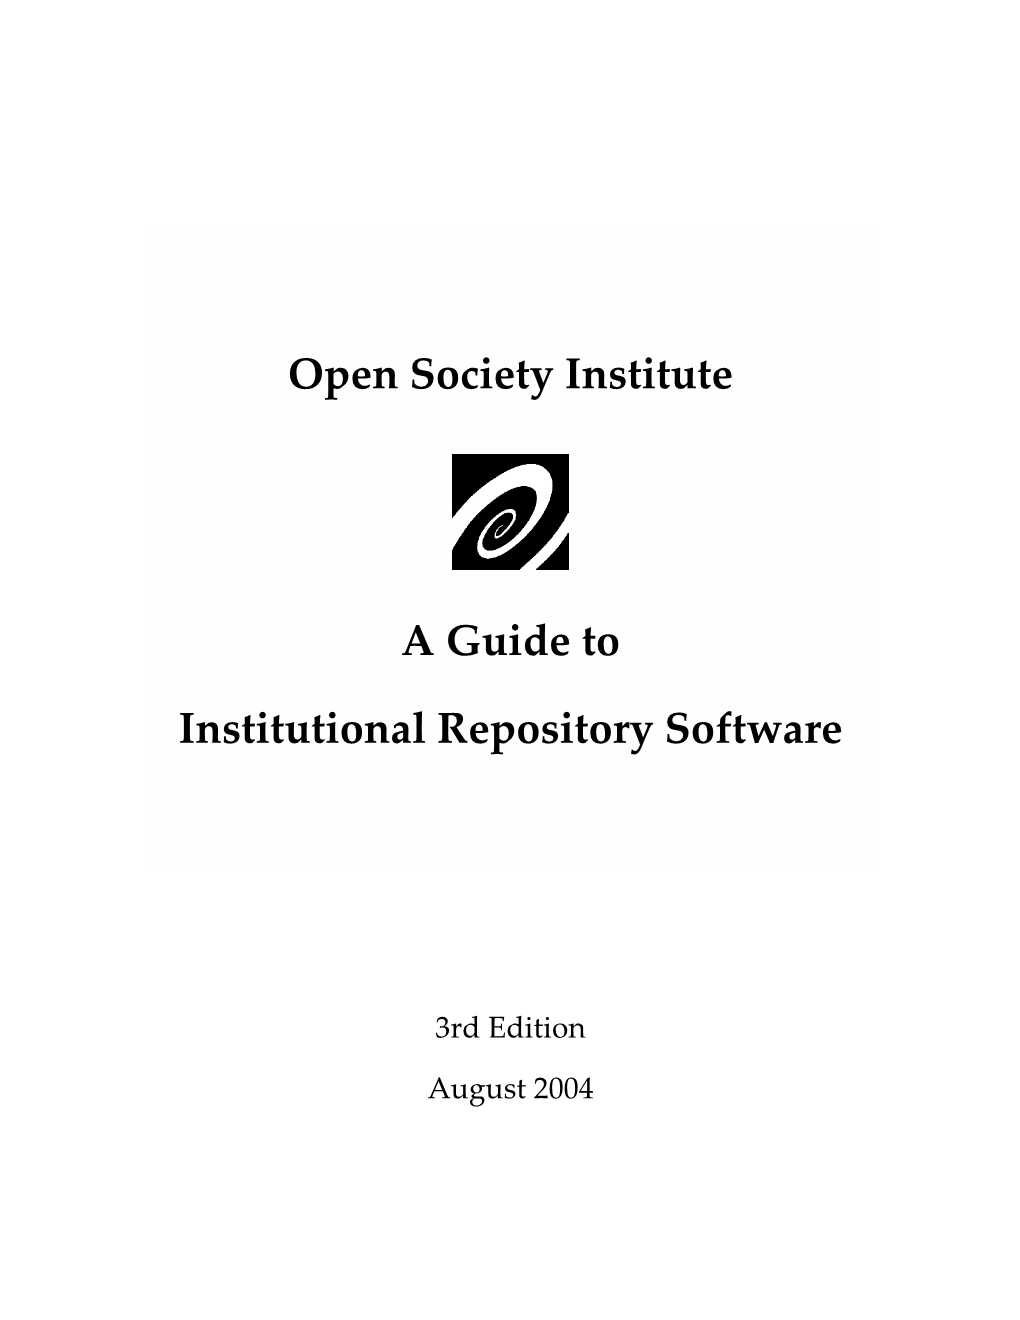 A Guide to Institutional Repository Software